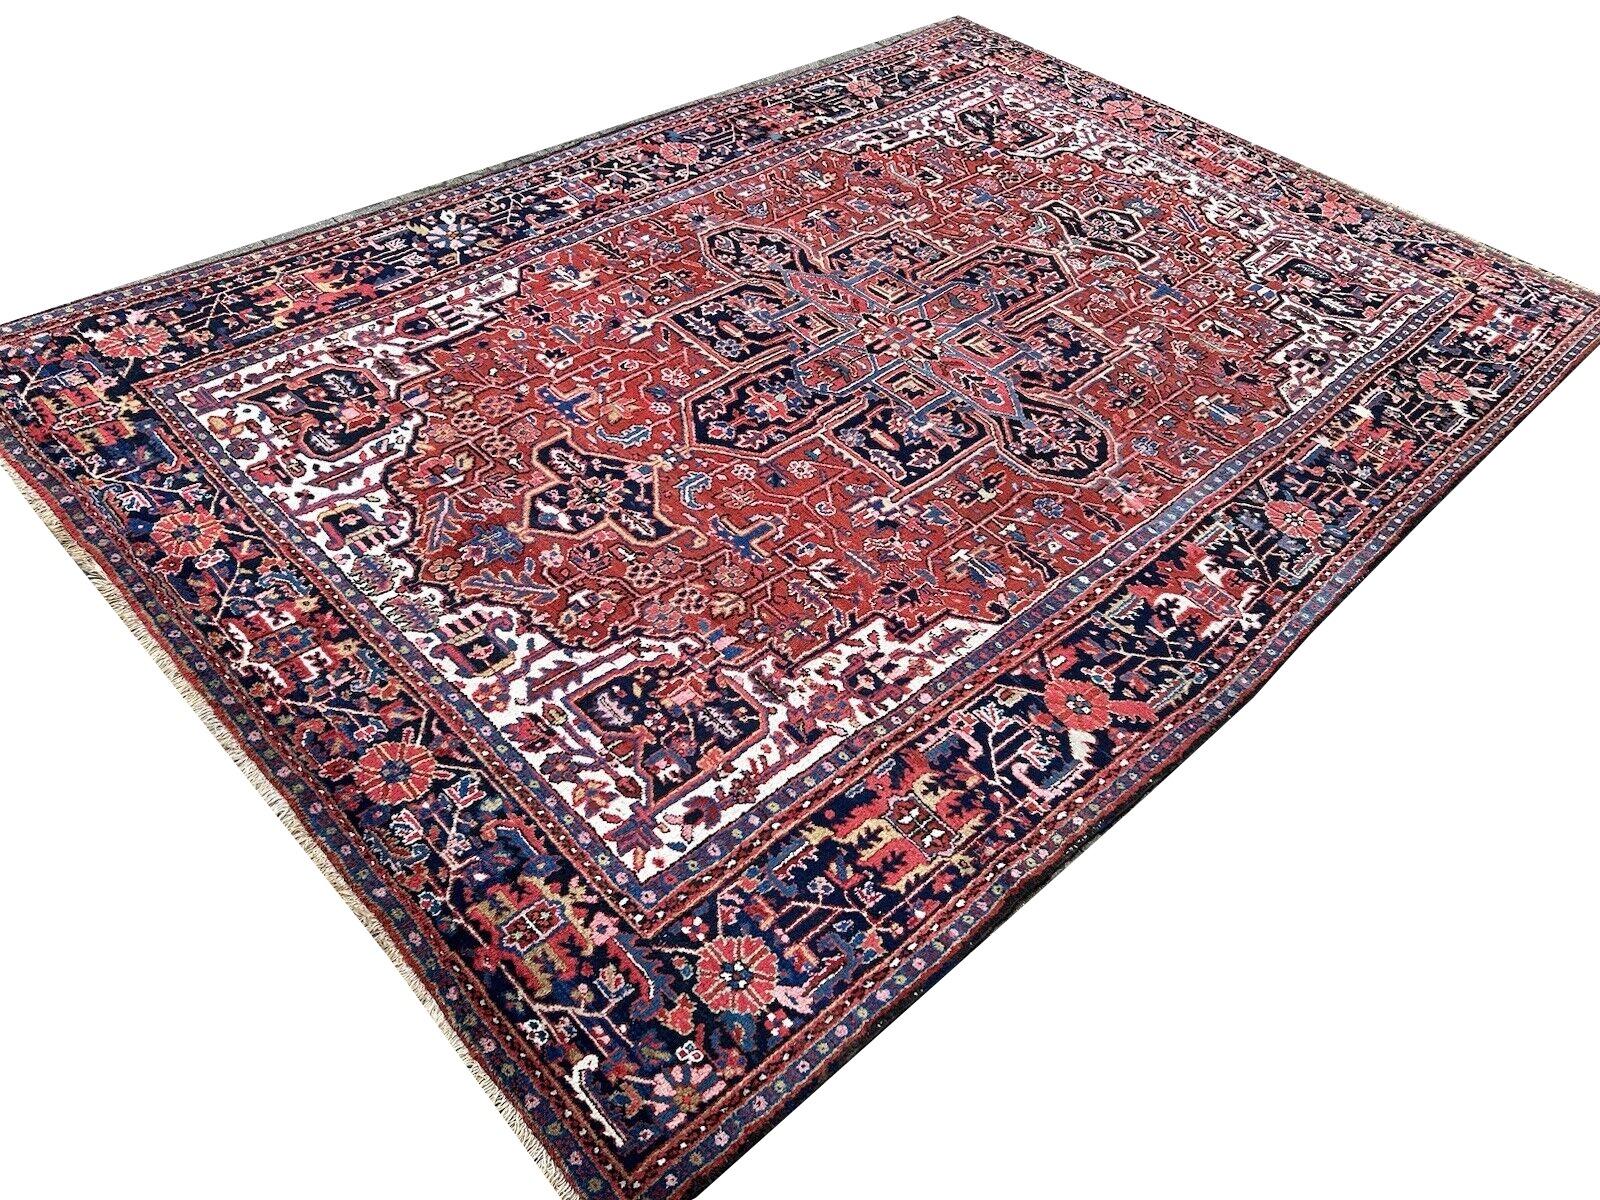 Azeri Heriz Serapi Antique Rug approx. 365 x 250 cm - 8.2 x 12 ft carpet room size.
• Beautiful large vintage rug
• All hand made, hand knotted
• Pile pure wool, warp and weft cotton
• Traditional design, very unique rug
• Condition: Very good pile,